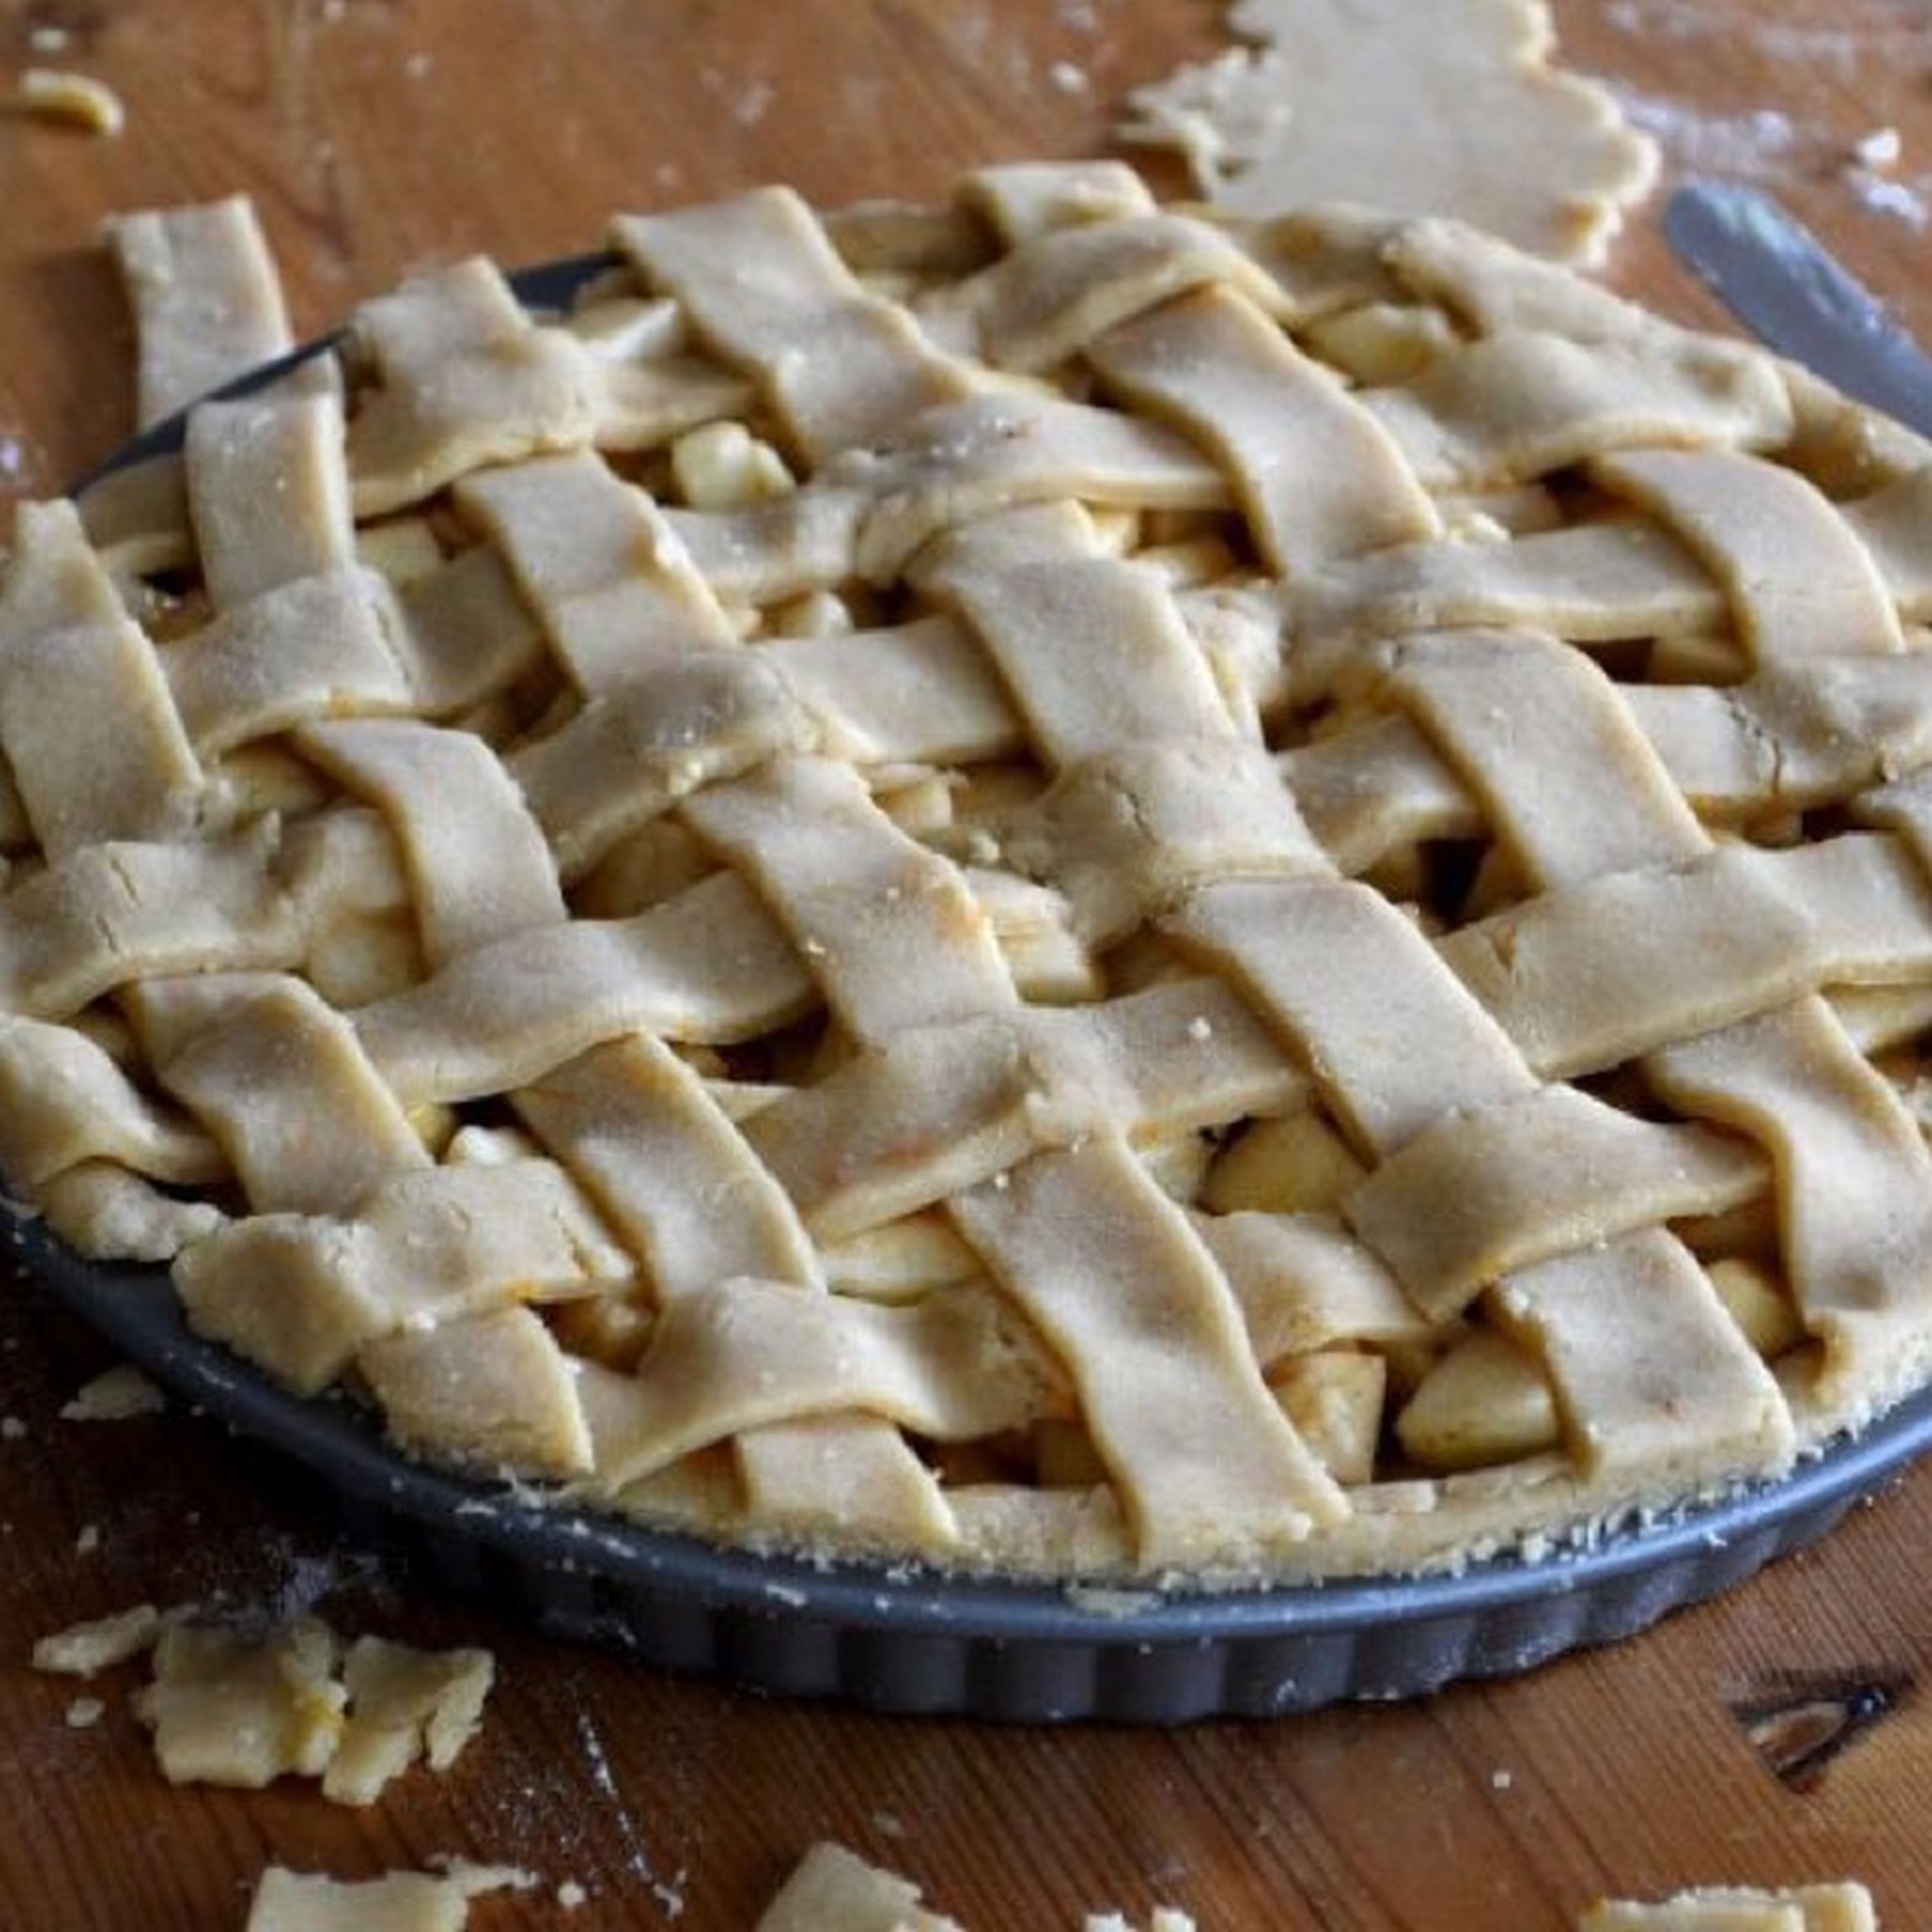 Apple and nut pie